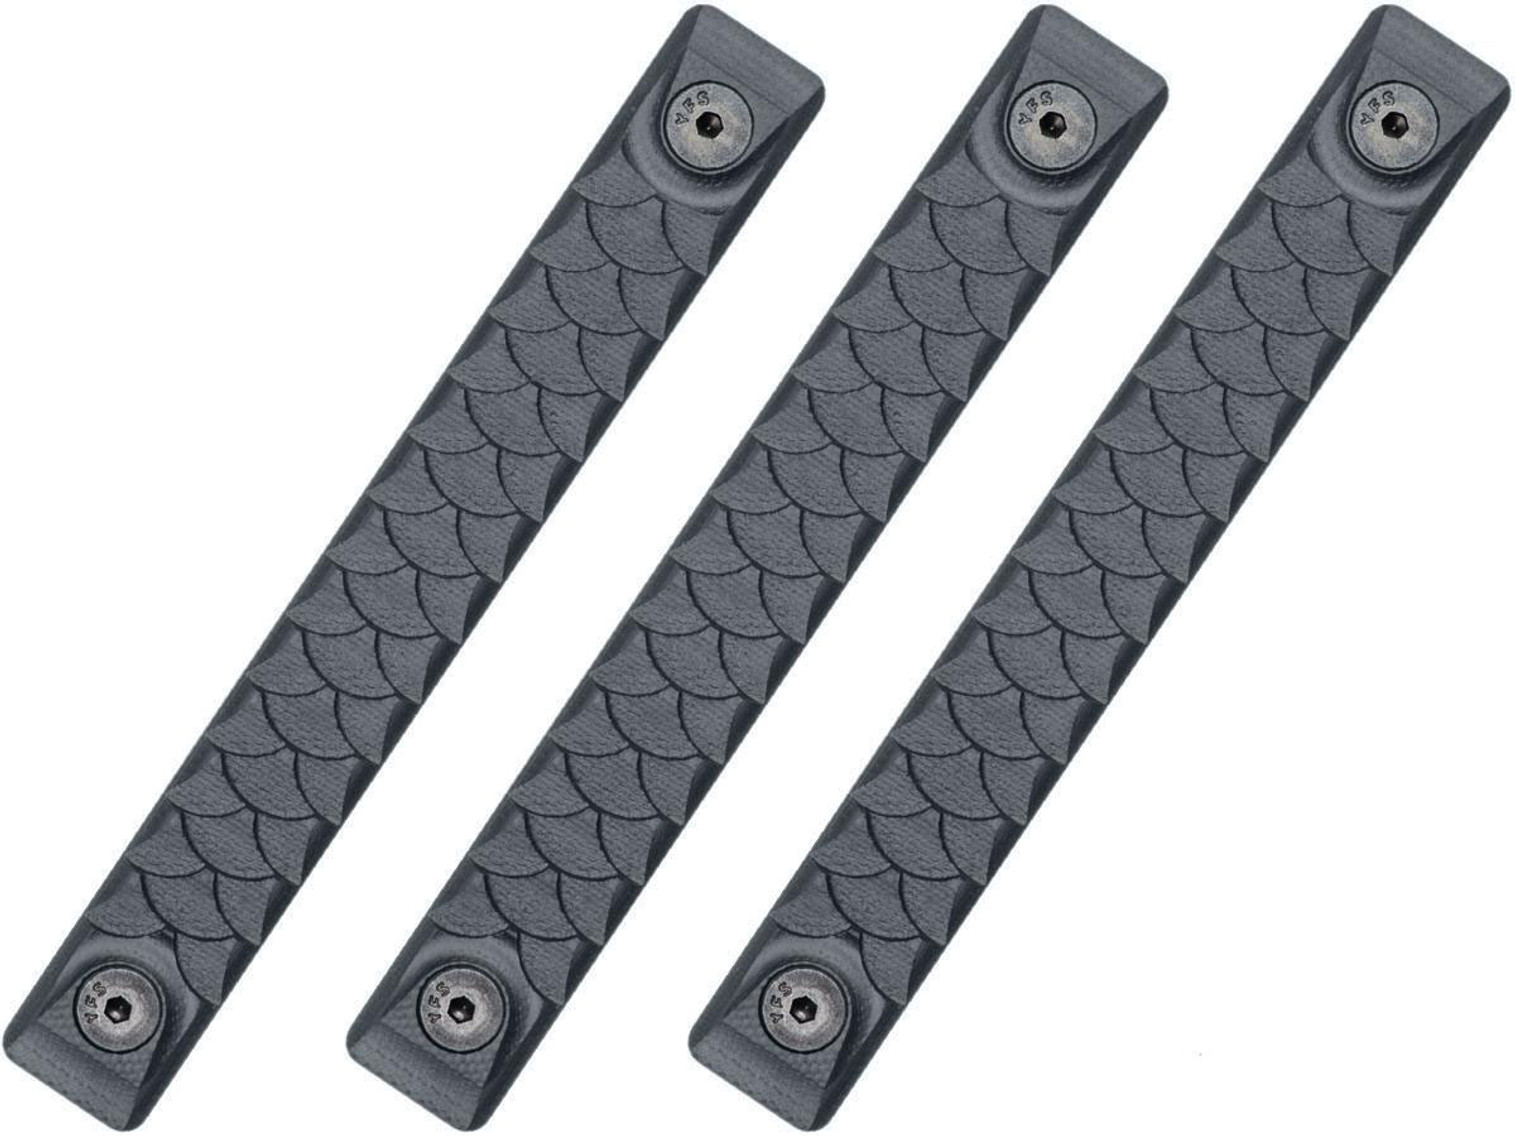 RailScales HTP Scales for Accessory Handguards (Model: Sniper Grey / M-LOK / Dragon / 3 Pack / 2.5 Slot)